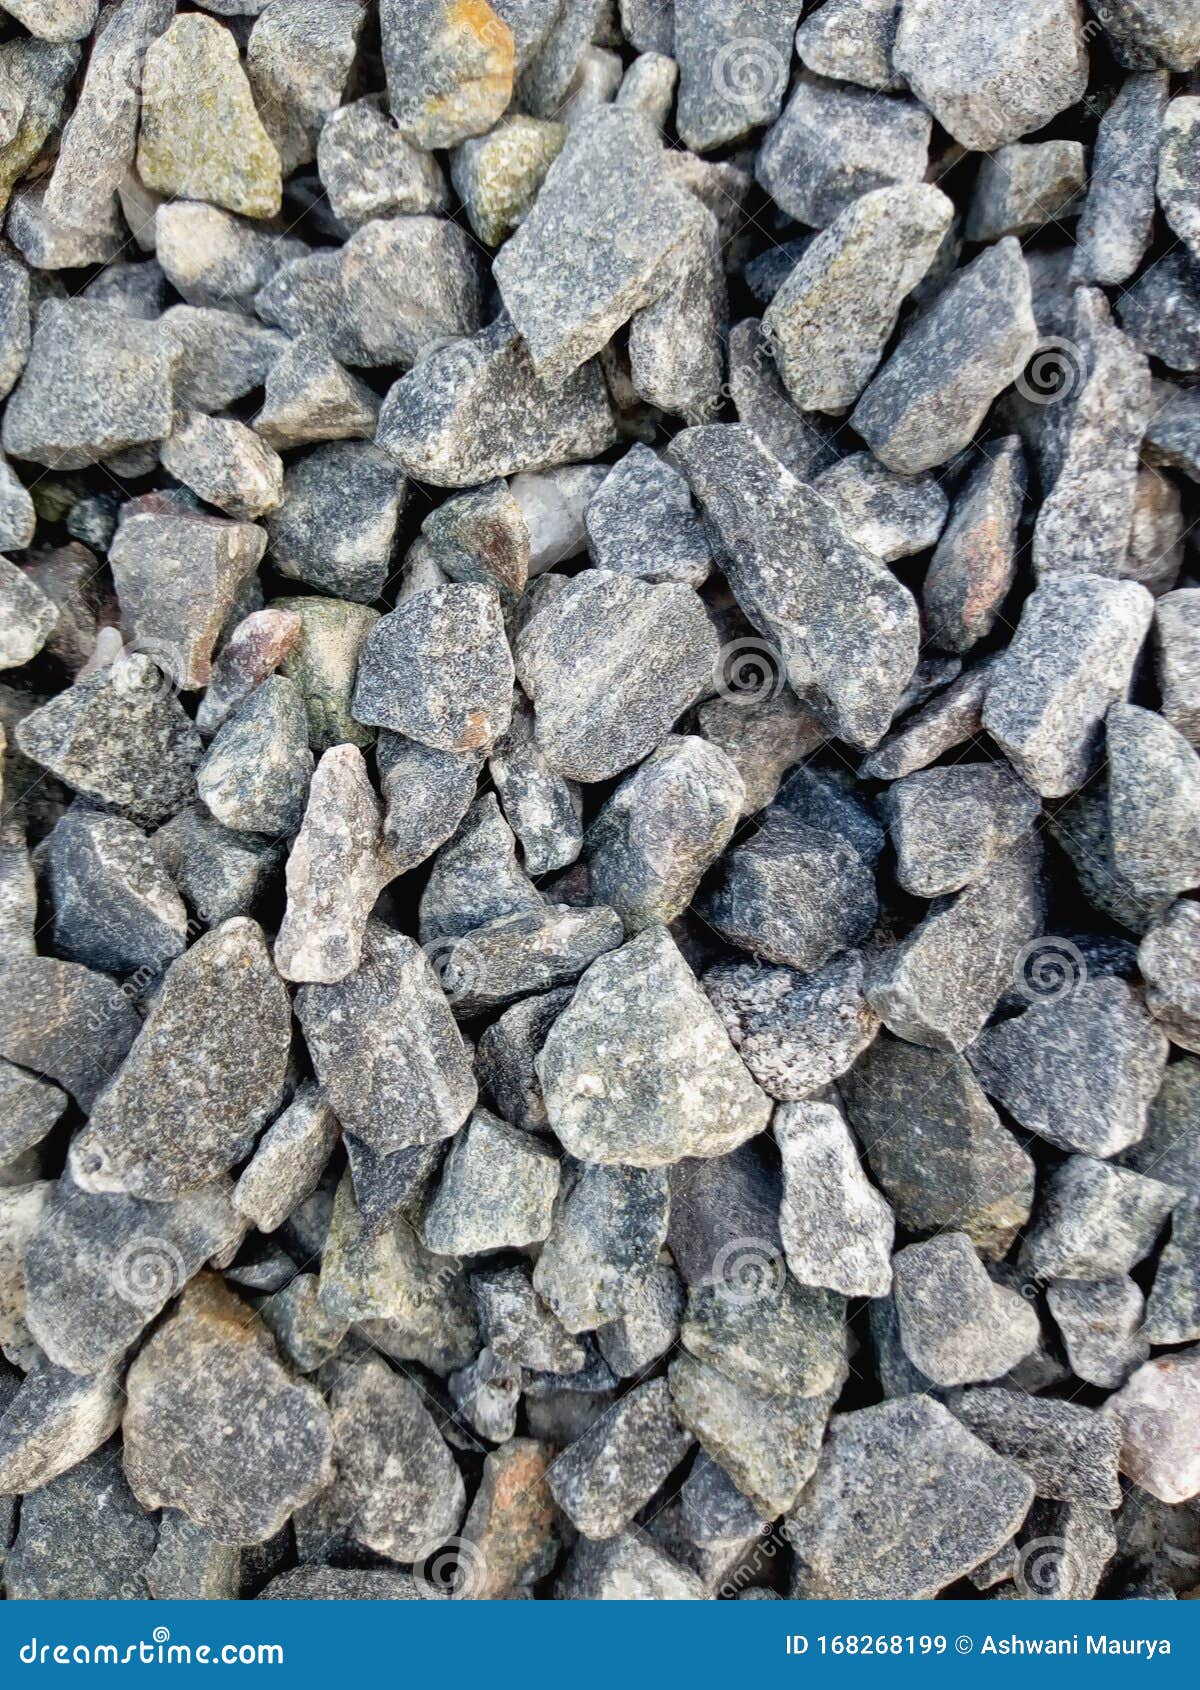 Wallpaper of Black & Grey Granite Chips Stone Stock Image - Image of small,  branches: 168268199